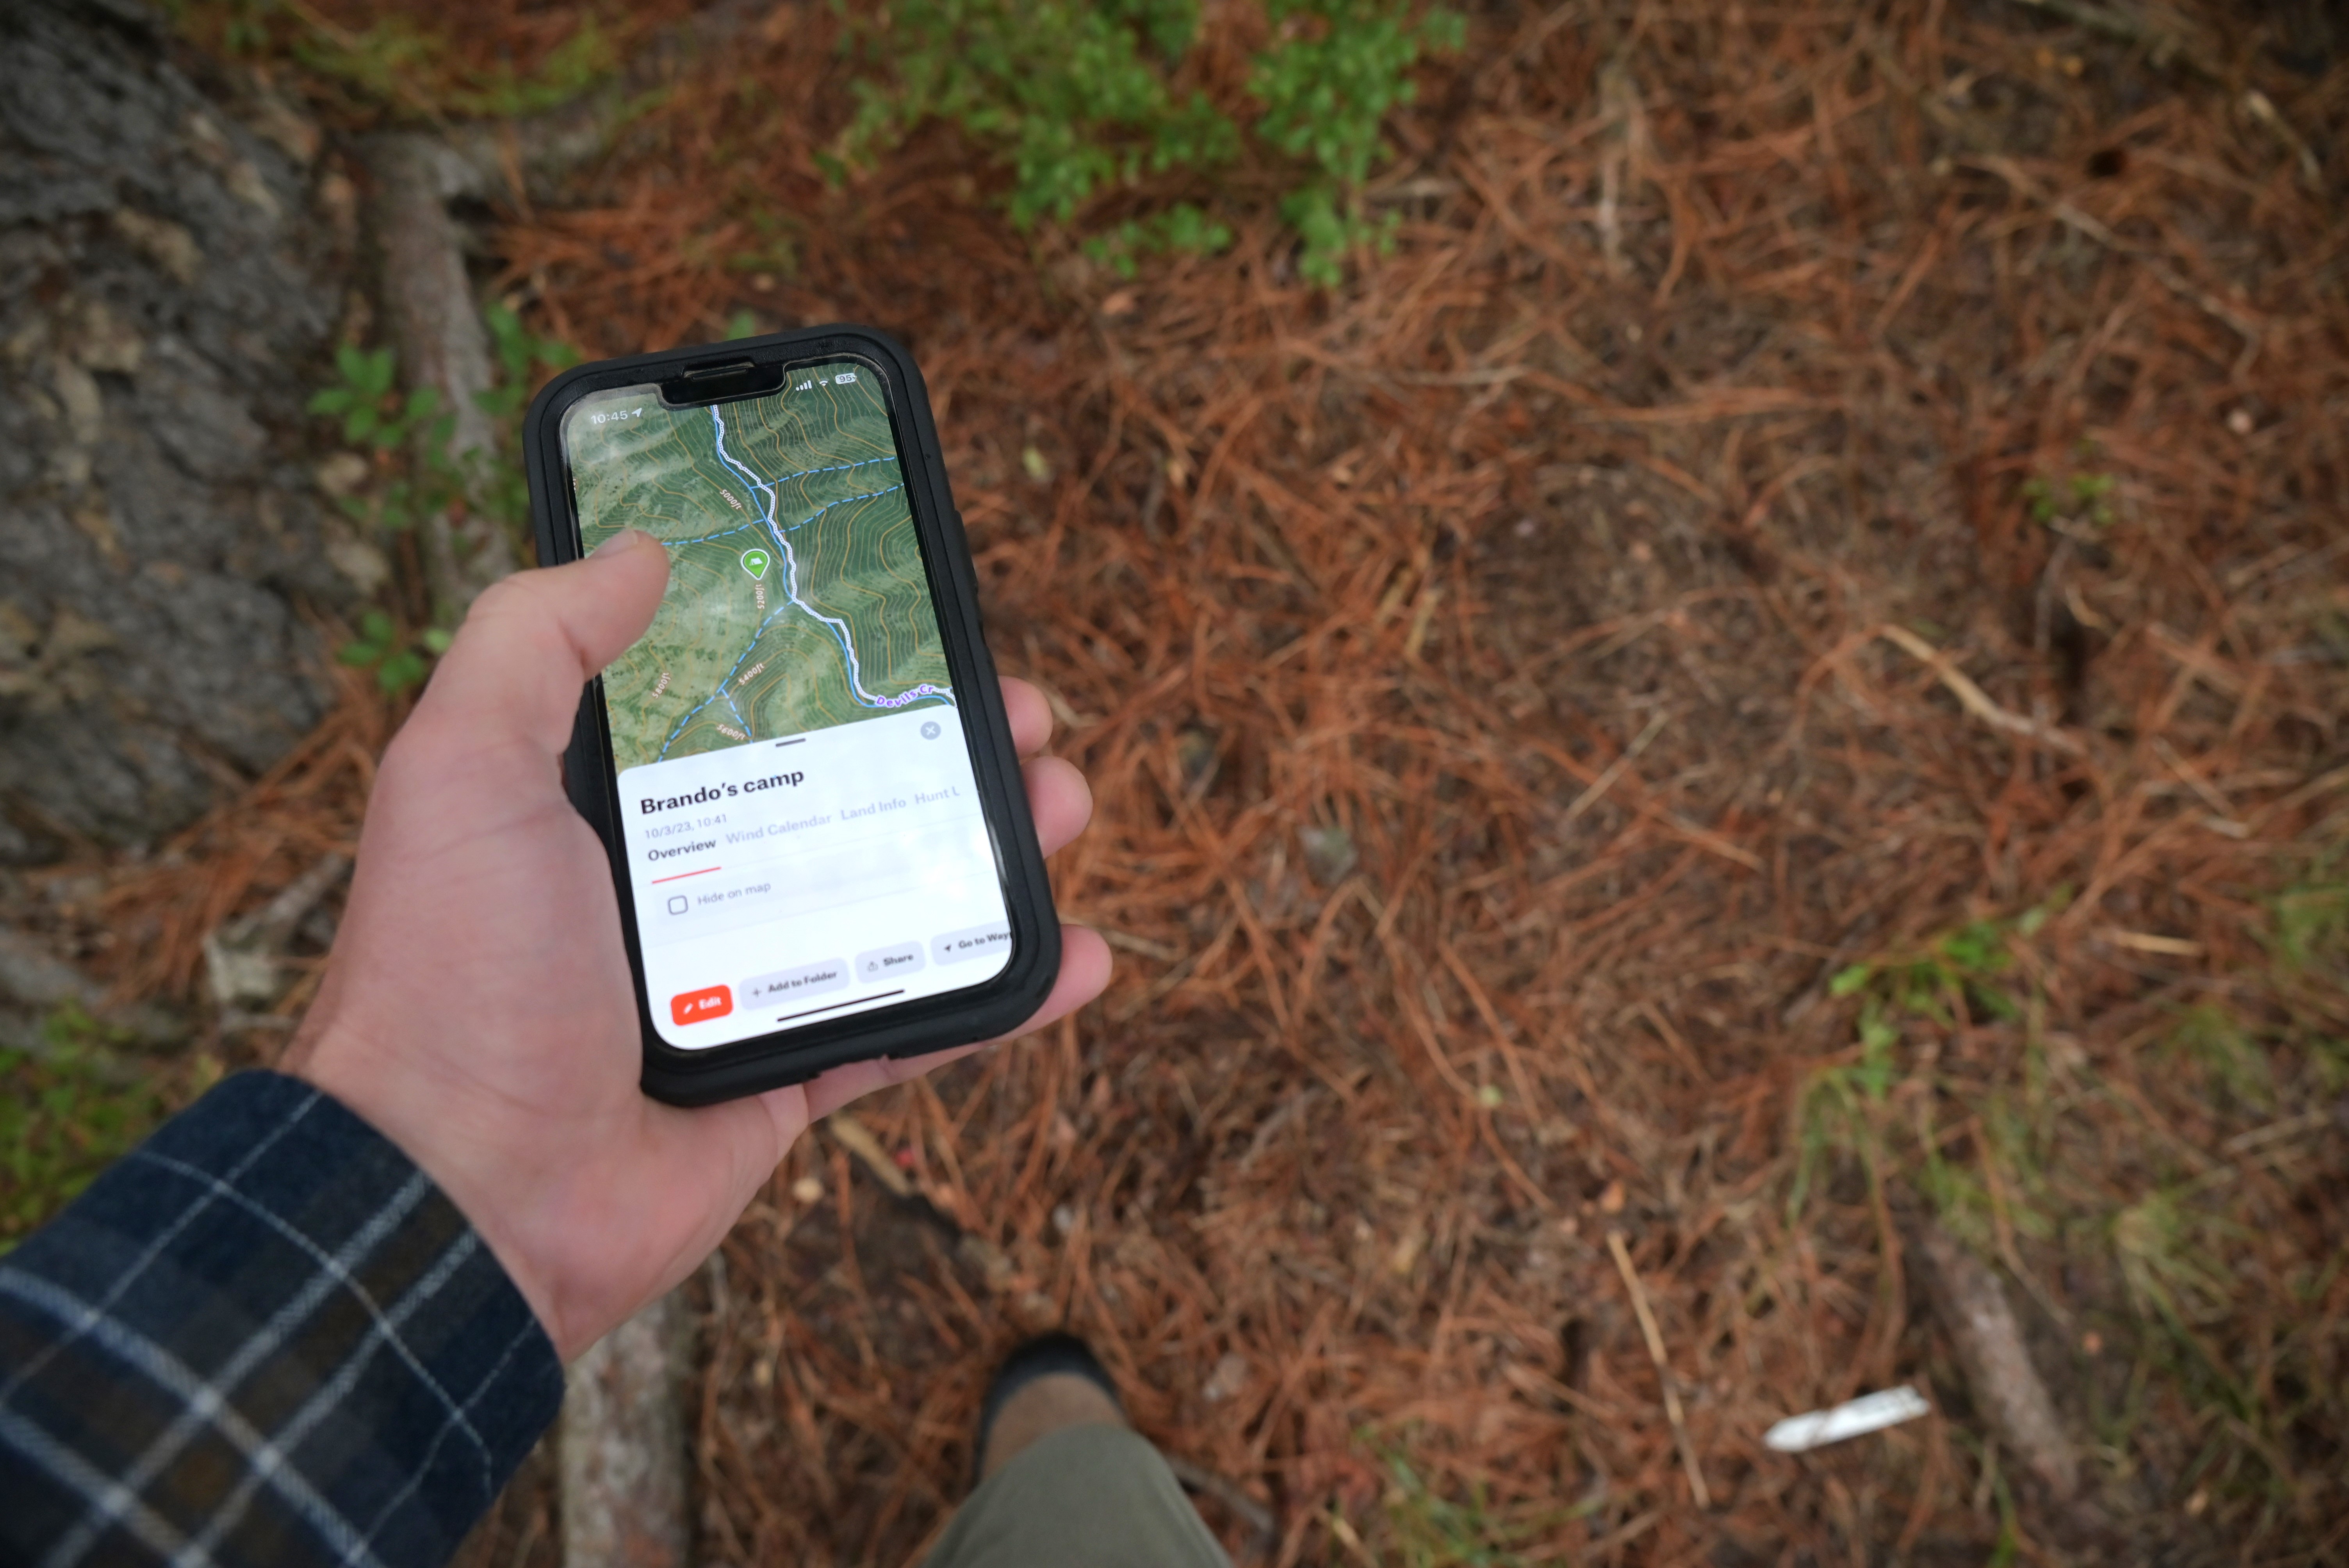 hunter using their cellphone to check gps location